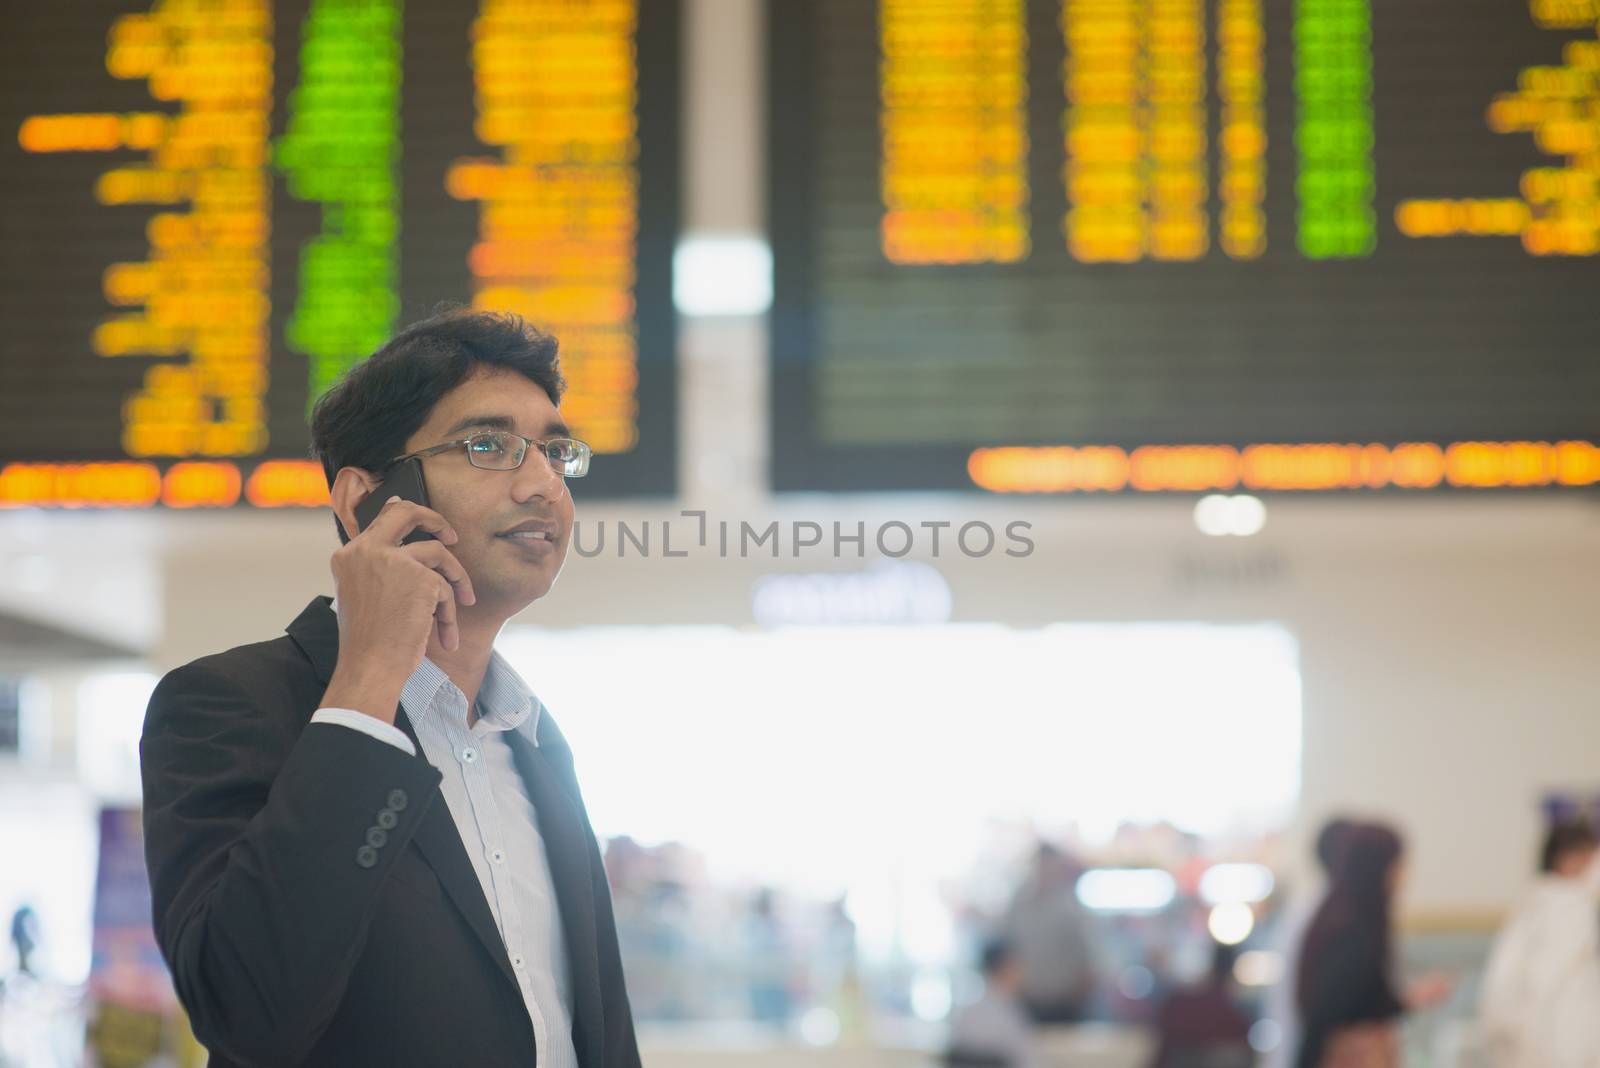 Asian Businessman on the phone during his business travel, at the airport .